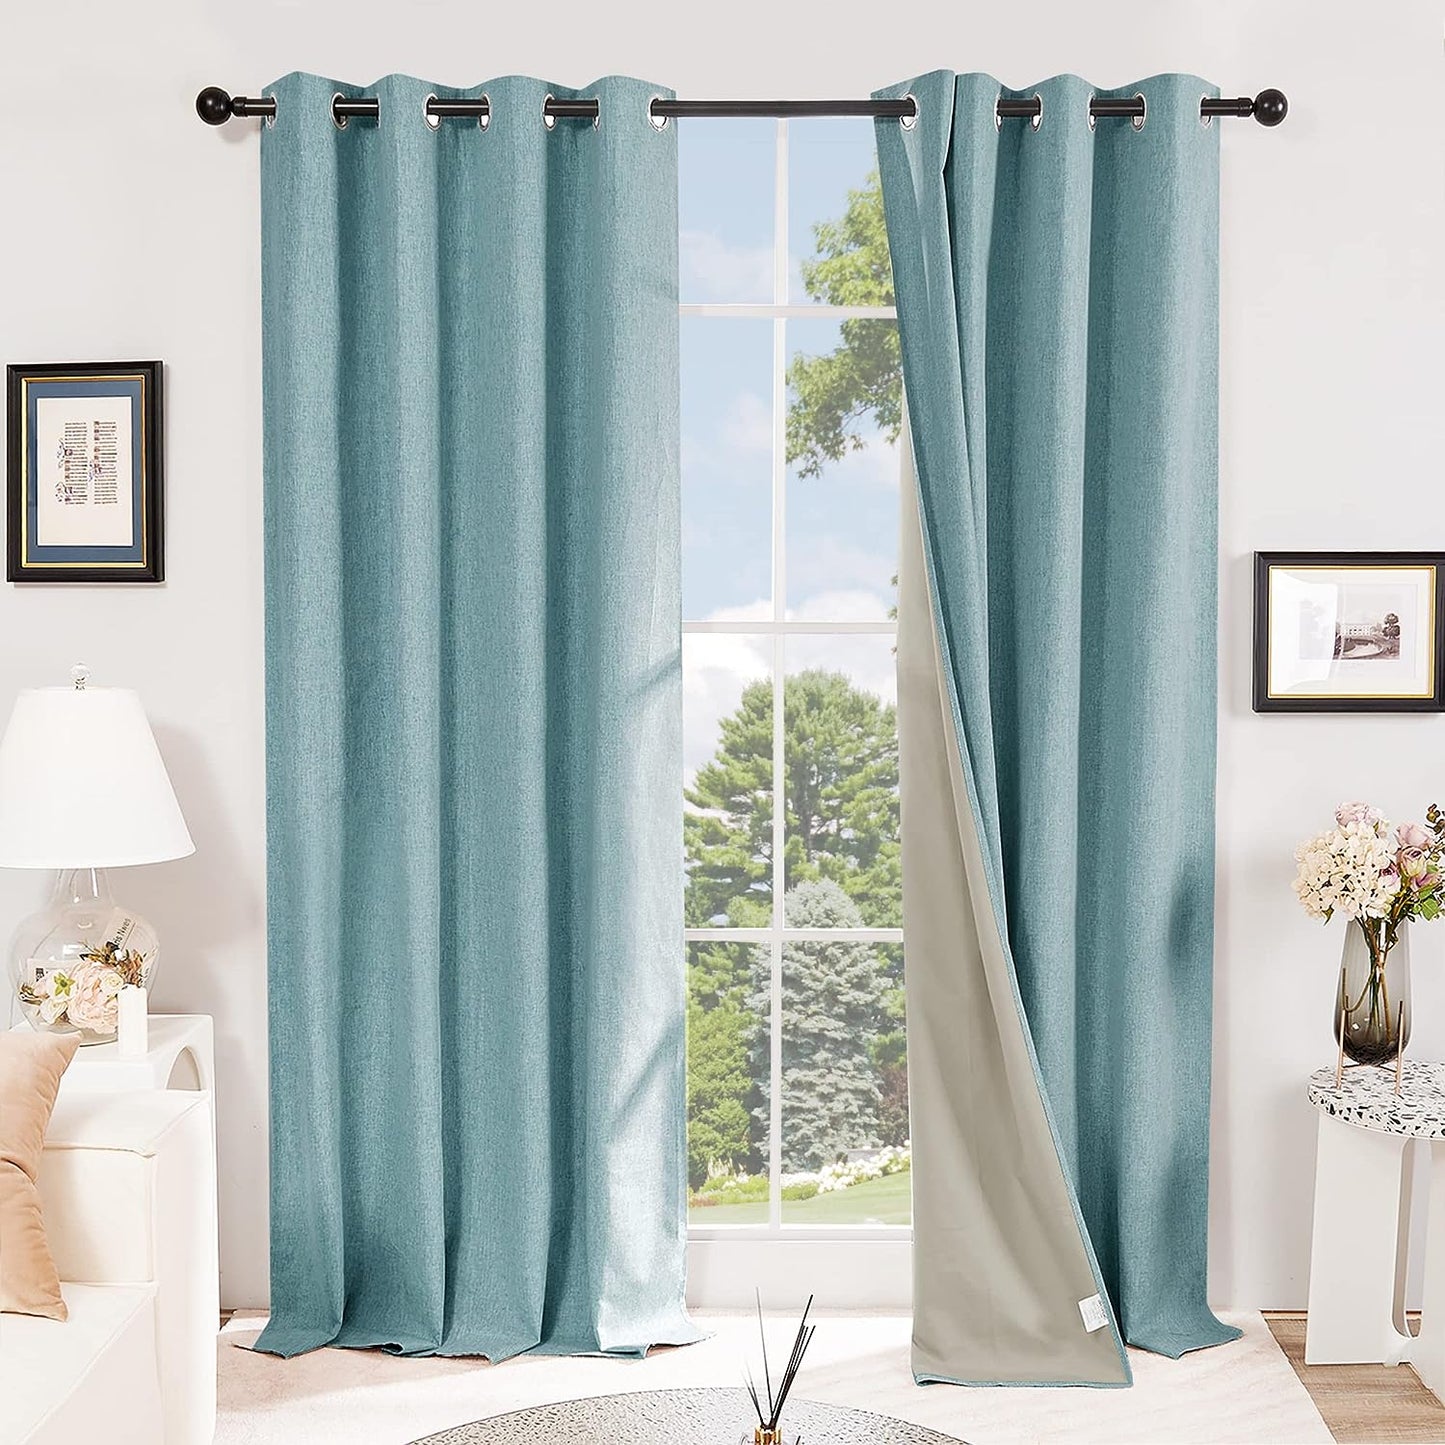 Deconovo Faux Linen Total Blackout Curtains 63 Inches Length, Light Blue, Grommet Thermal Insulated Curtain, Noise Reduction Draperies for Bedroom Living Room, 52" W X 63" L, 1 Pair  DECONOVO Teal 52Wx72L Inch 